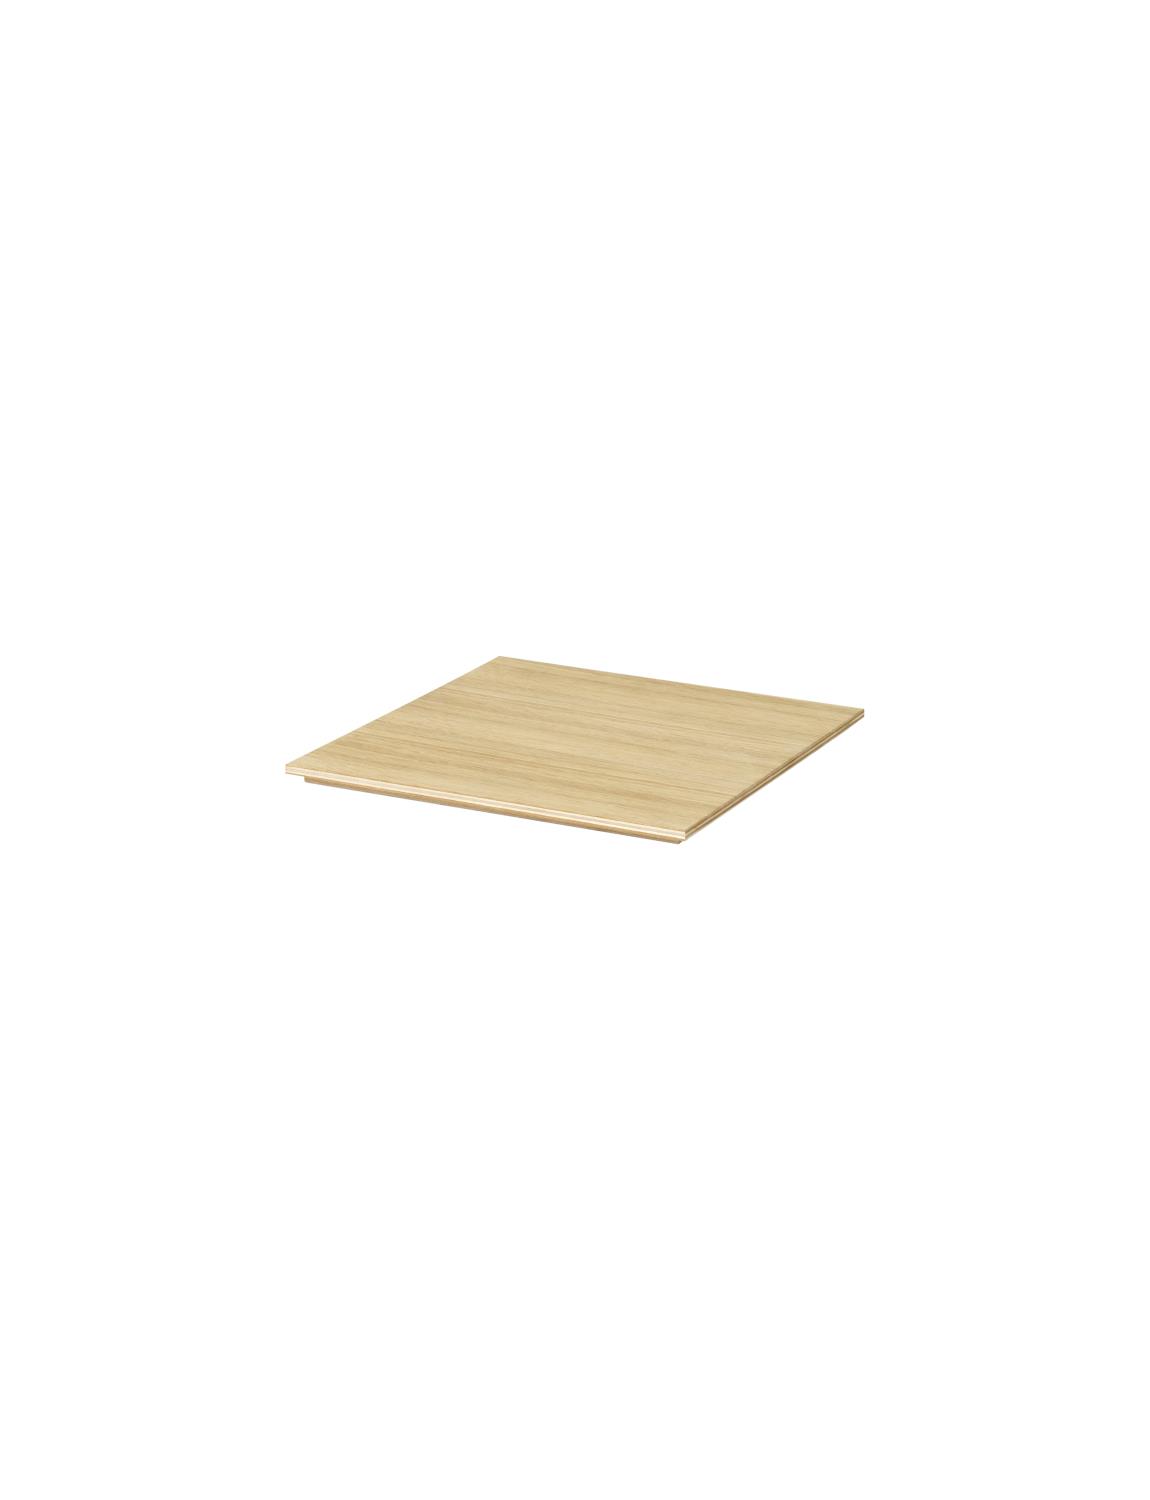 Ferm Living - Tray For Plant Box - Oiled Oak